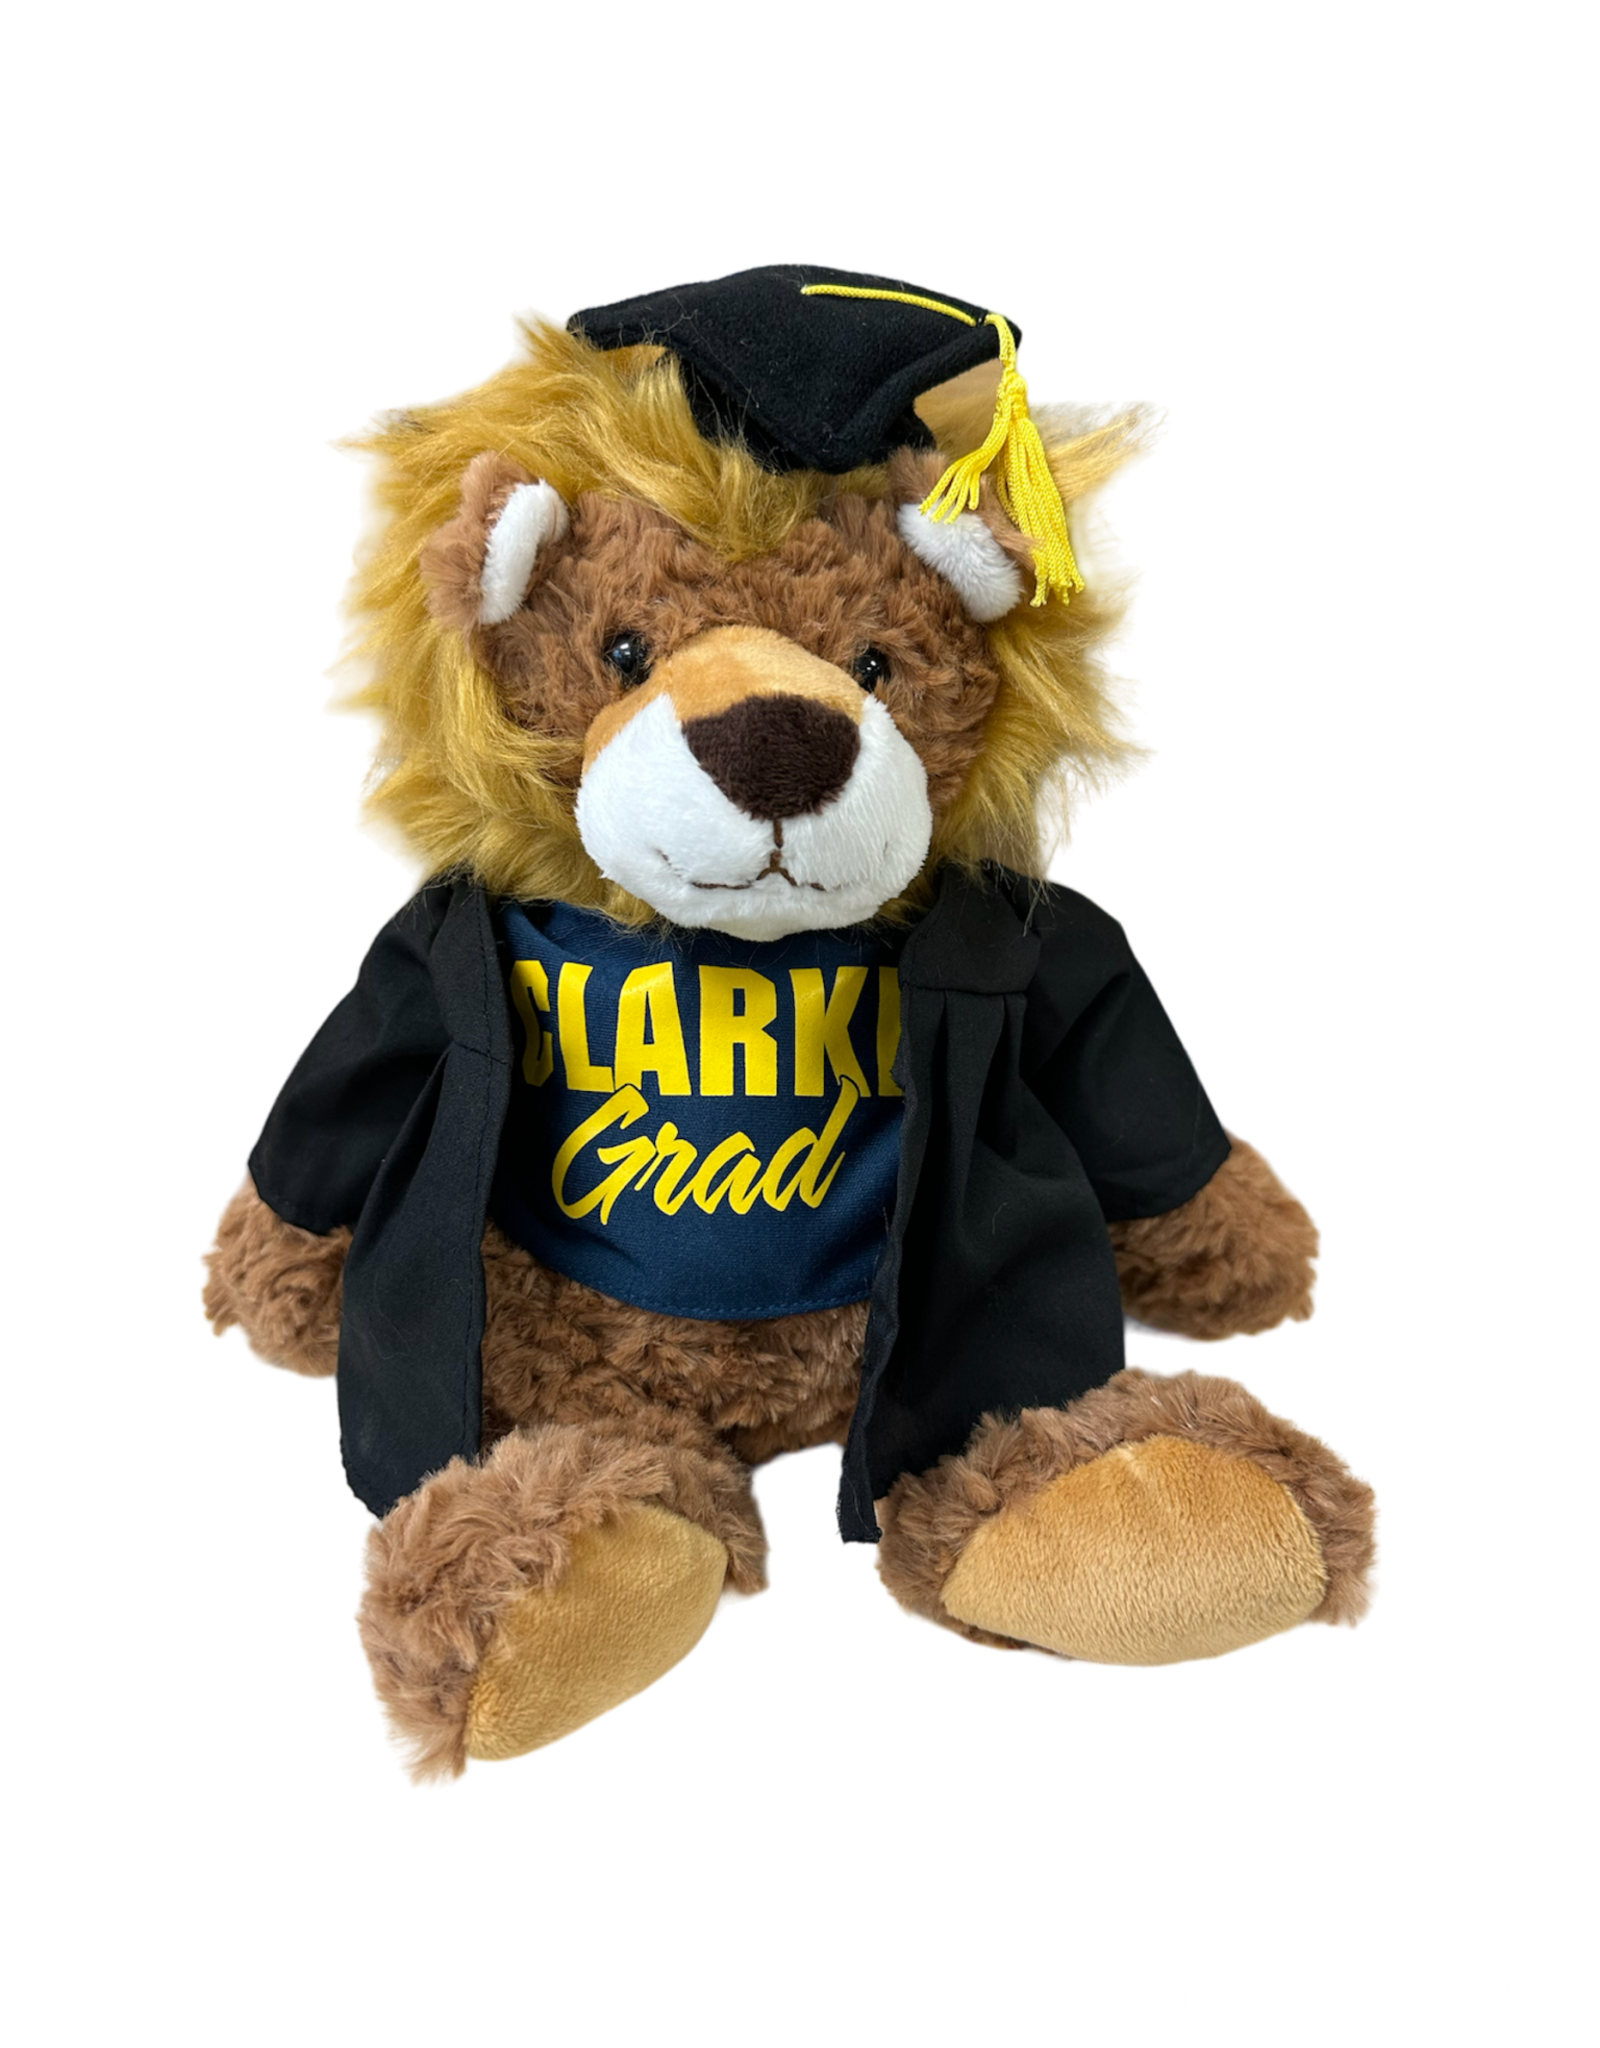 Graduation Cuddle Buddy Lion W/ Cap, Gown, and Tee